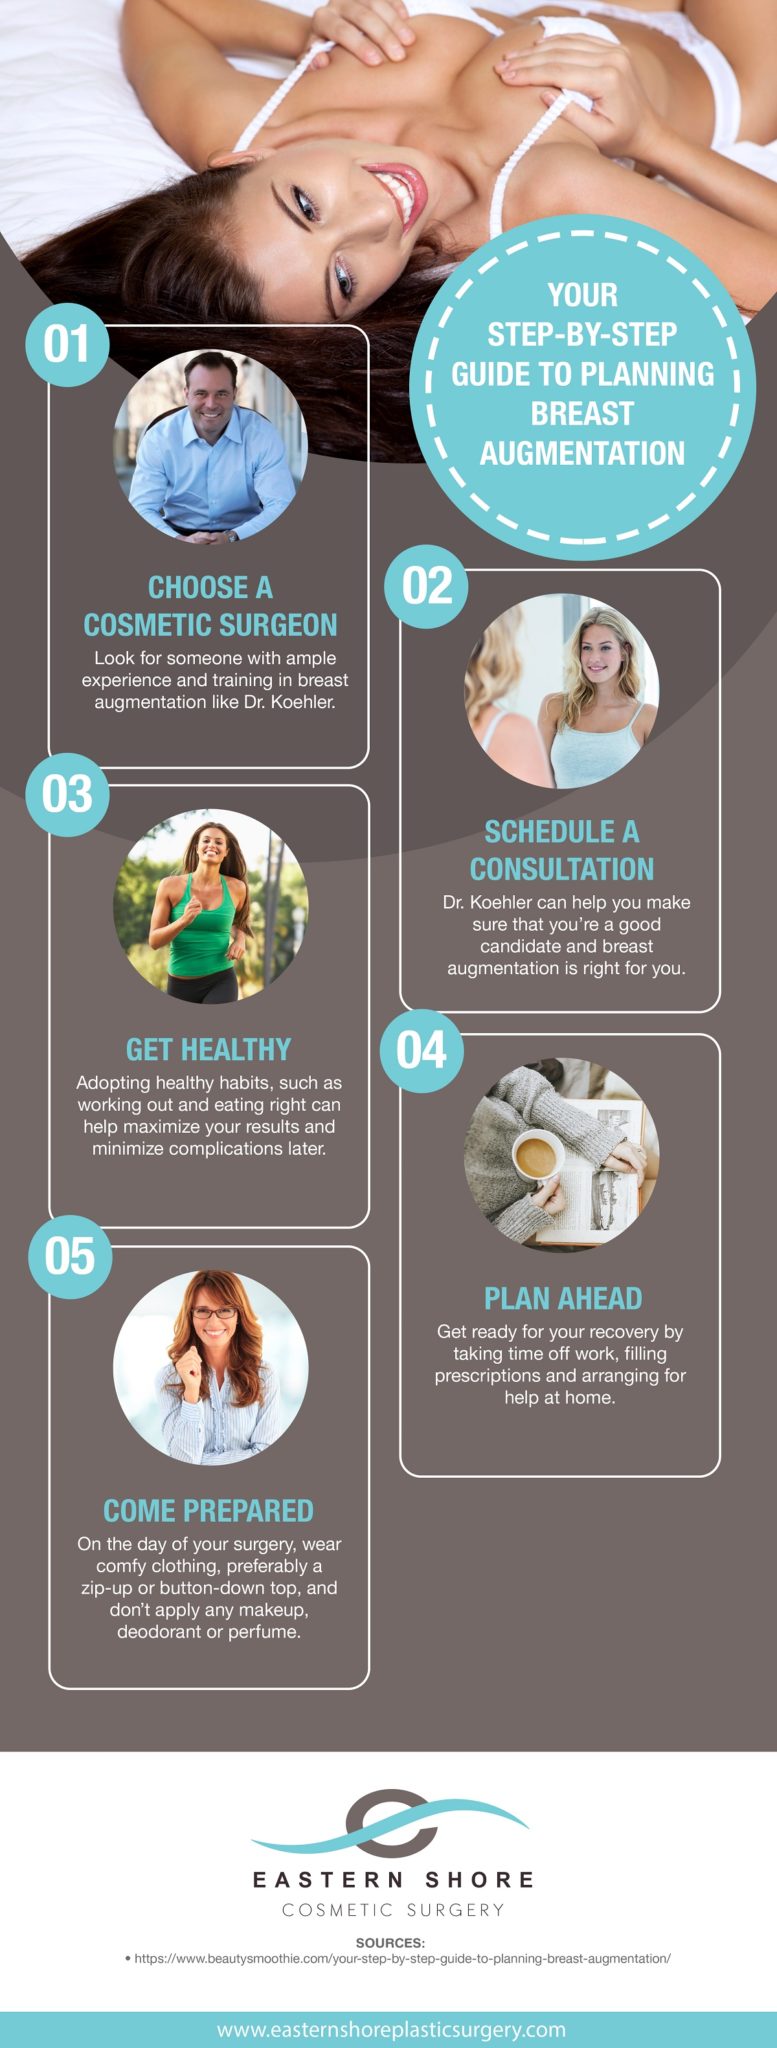 Your Step-By-Step Guide to Planning Breast Augmentation [Infographic]